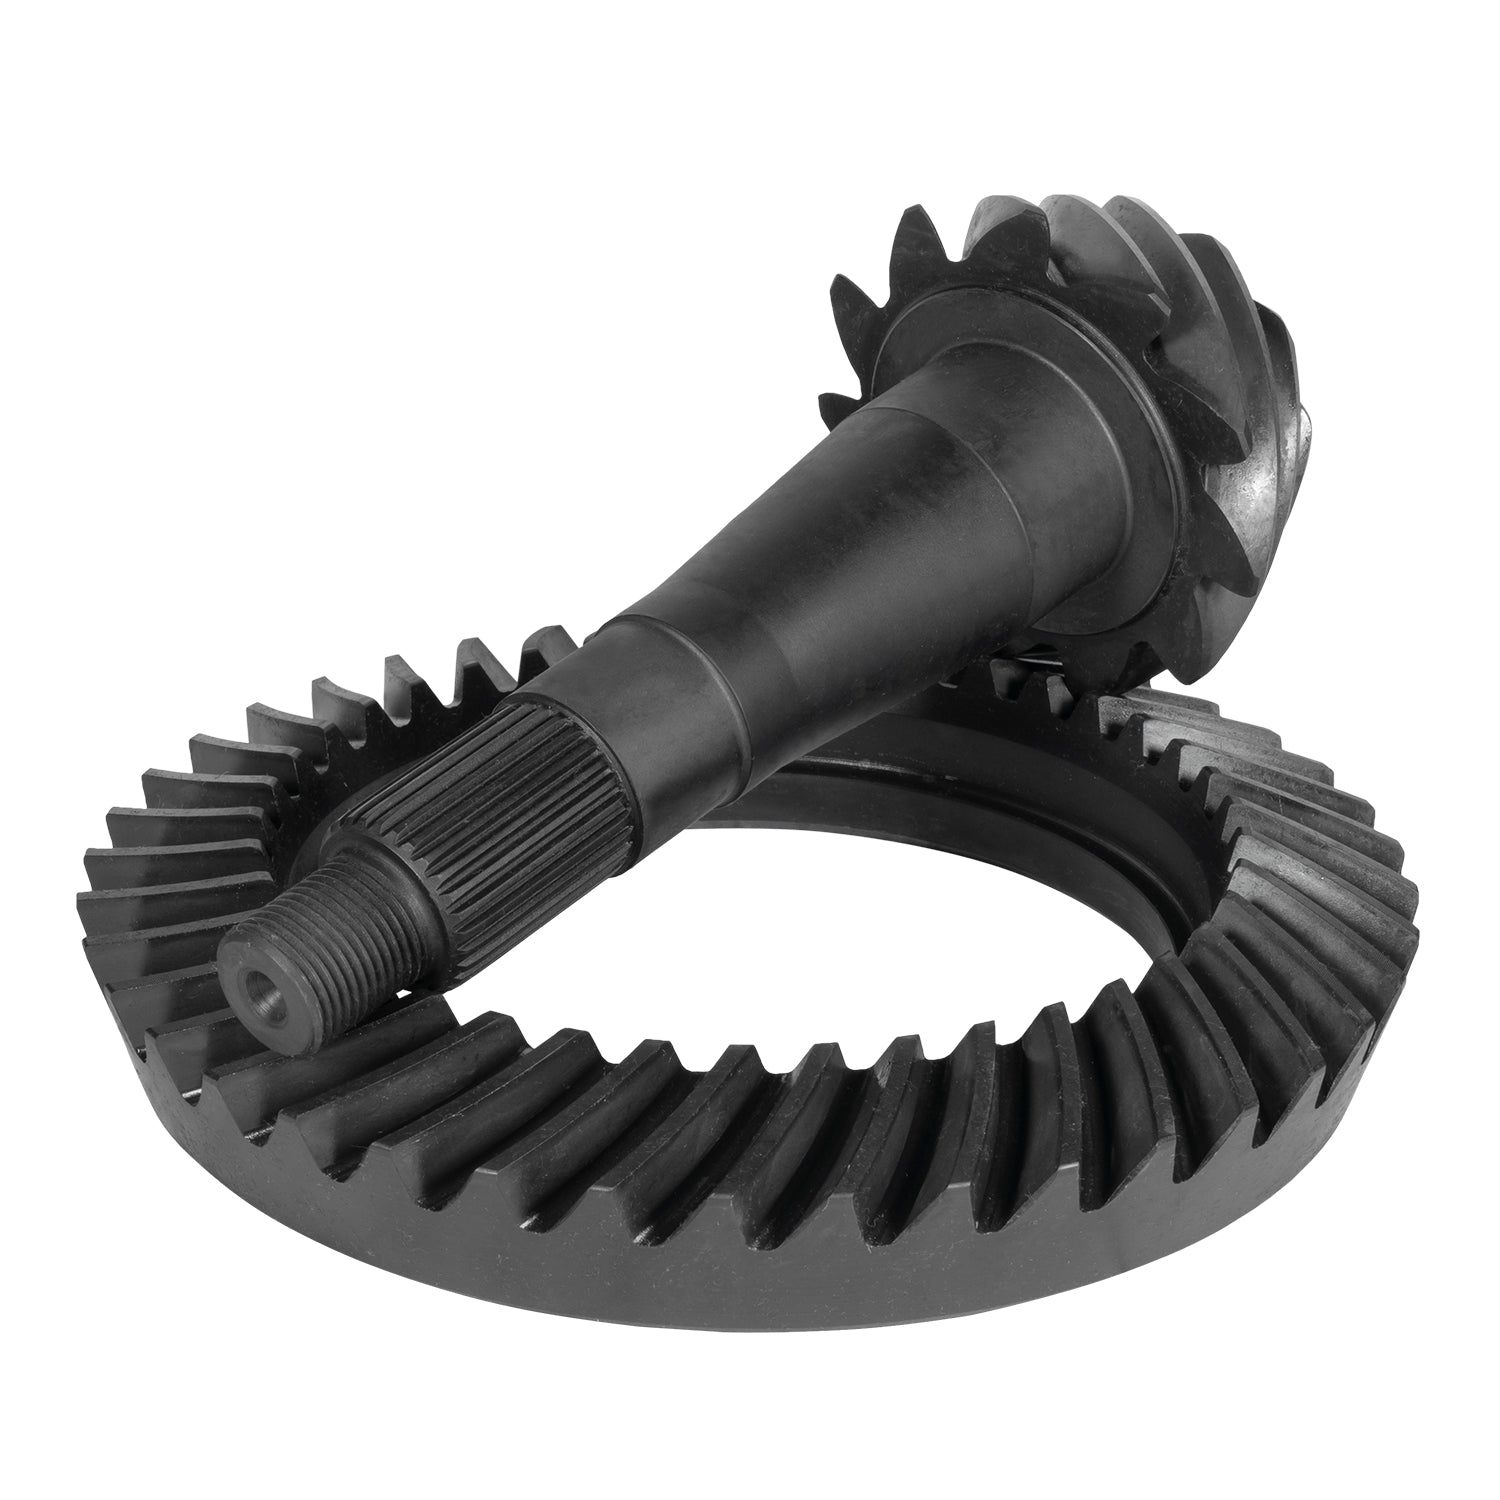 Yukon Gear Chrysler Dodge Plymouth Differential Ring and Pinion Kit - Rear YGK2342